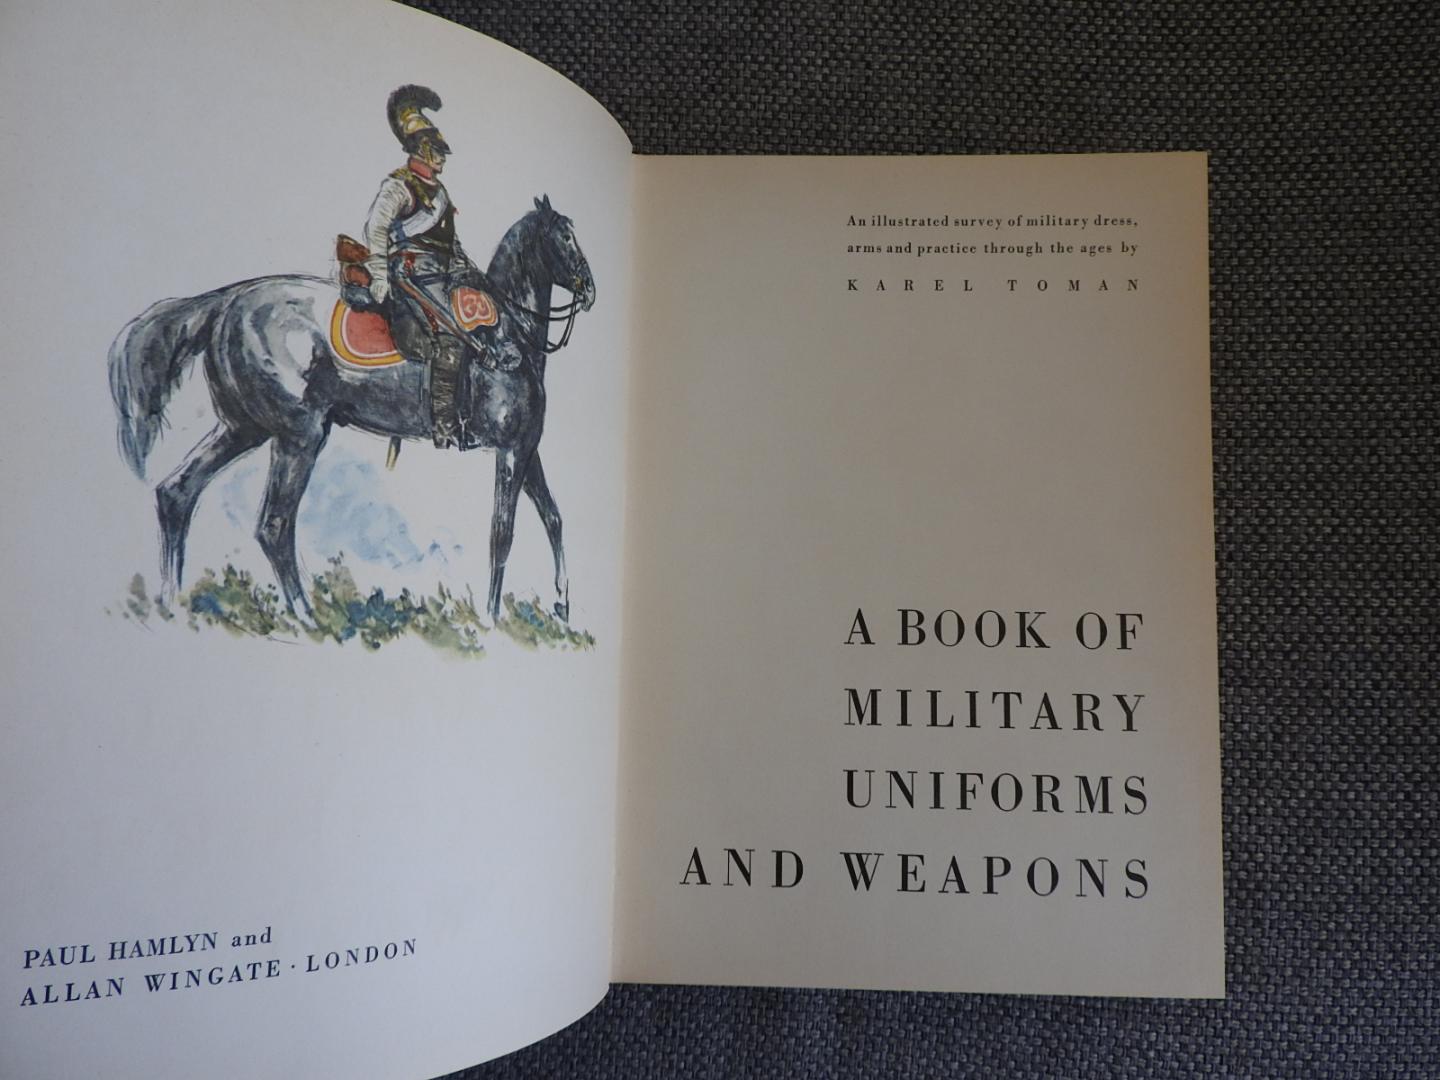 Toman, Karel - A Book of Military Uniforms and Weapons. An illustrated survey of military dress, arms and practice through the ages